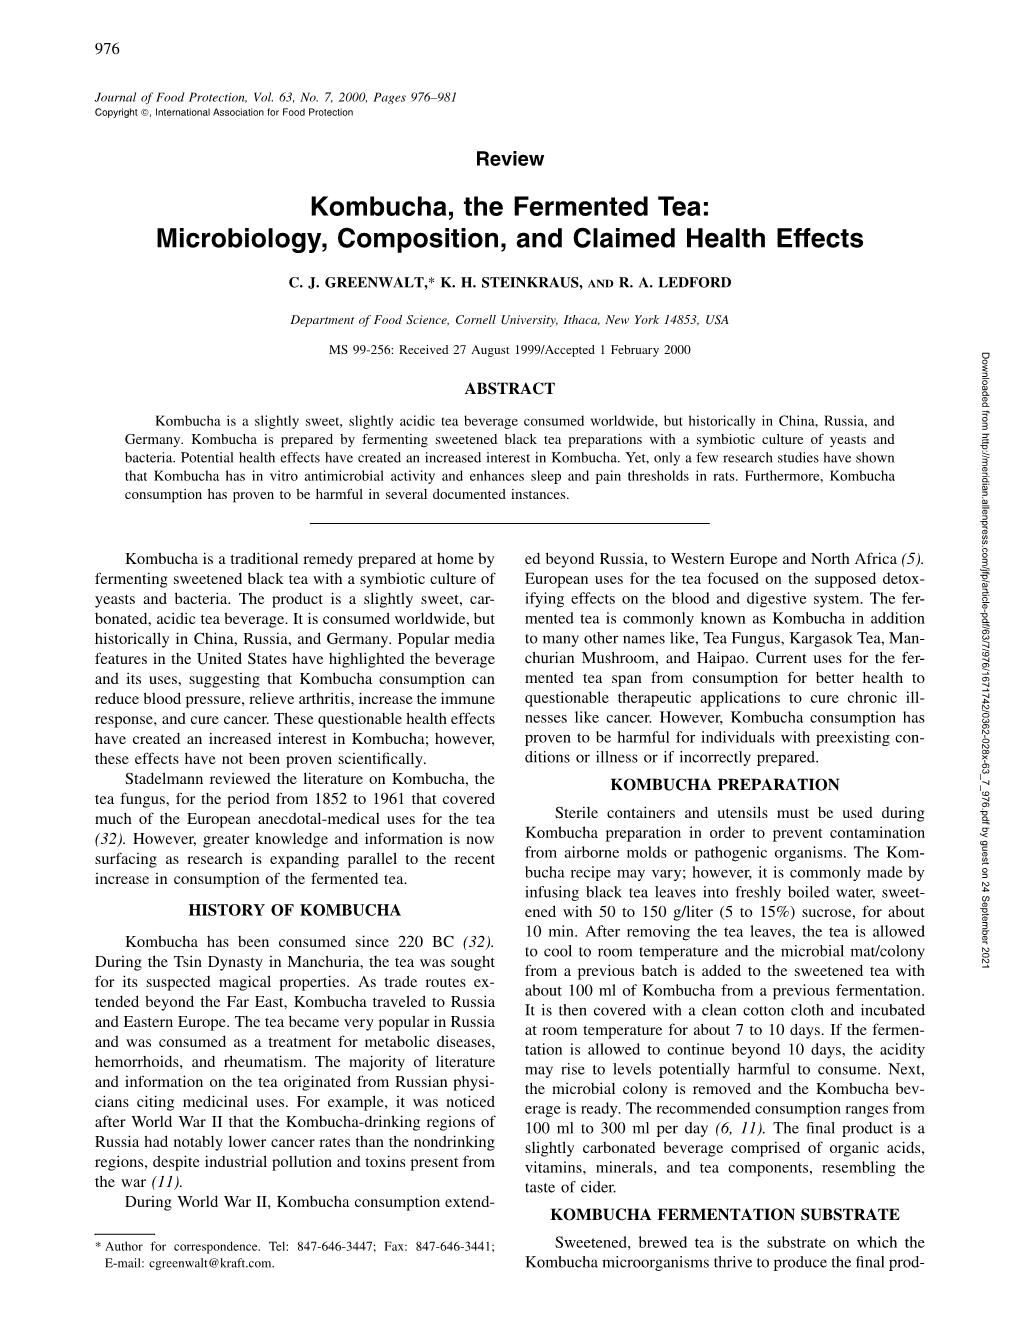 Kombucha, the Fermented Tea: Microbiology, Composition, and Claimed Health Effects